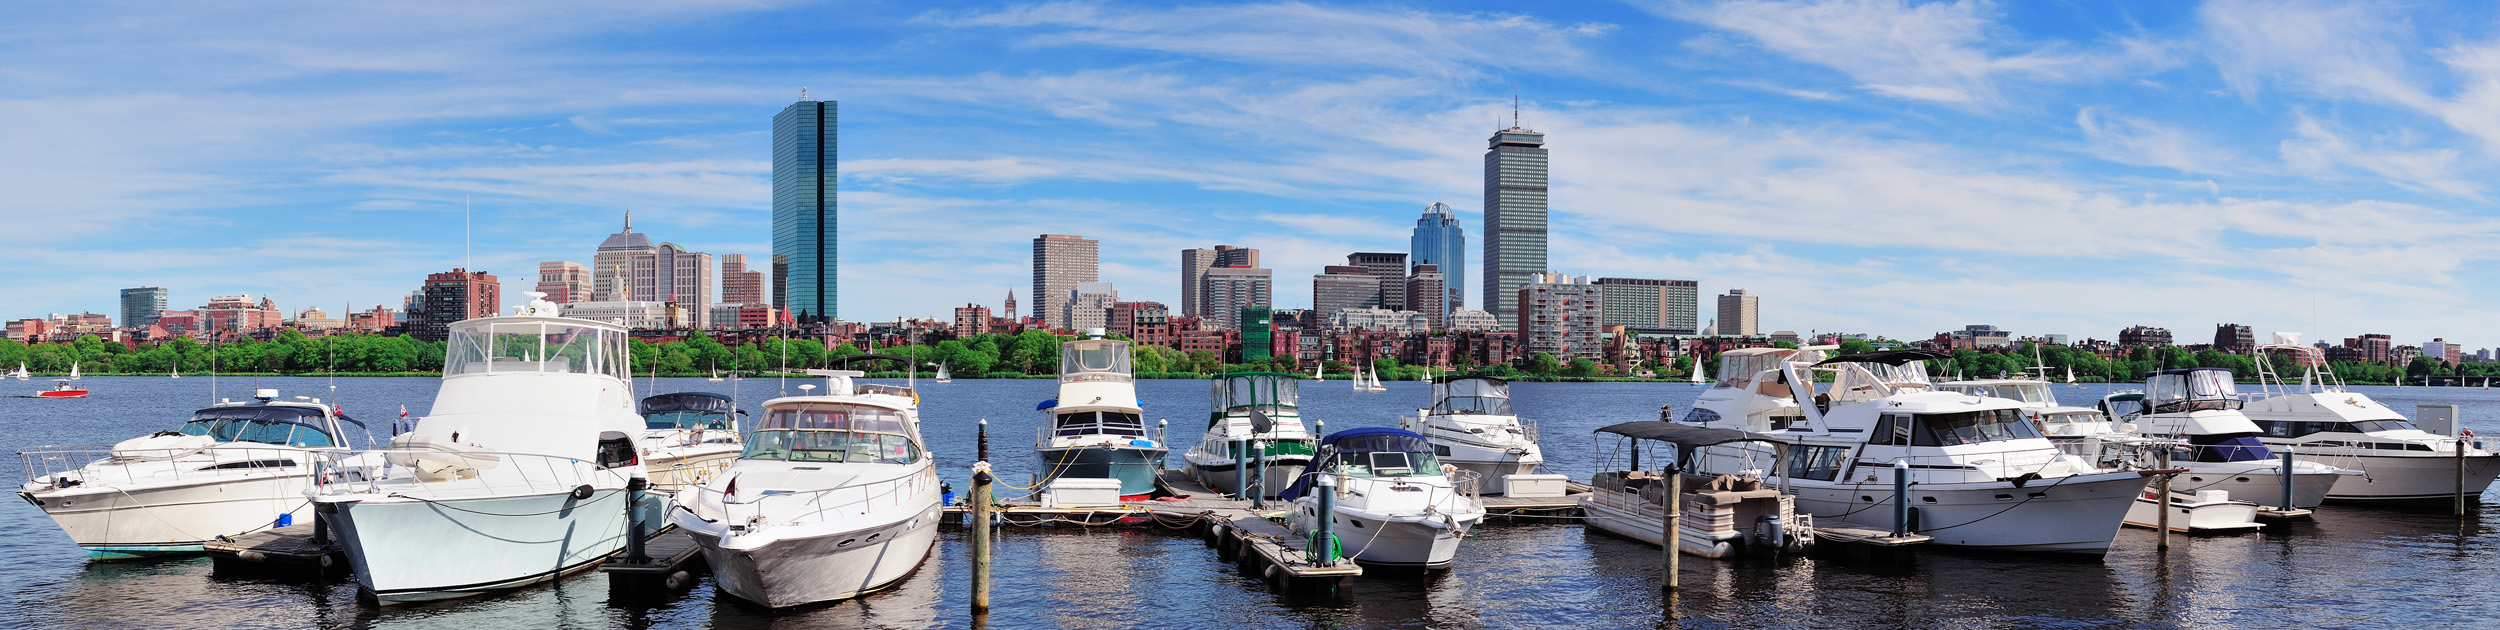 boats in Boston harbor with the city in the background